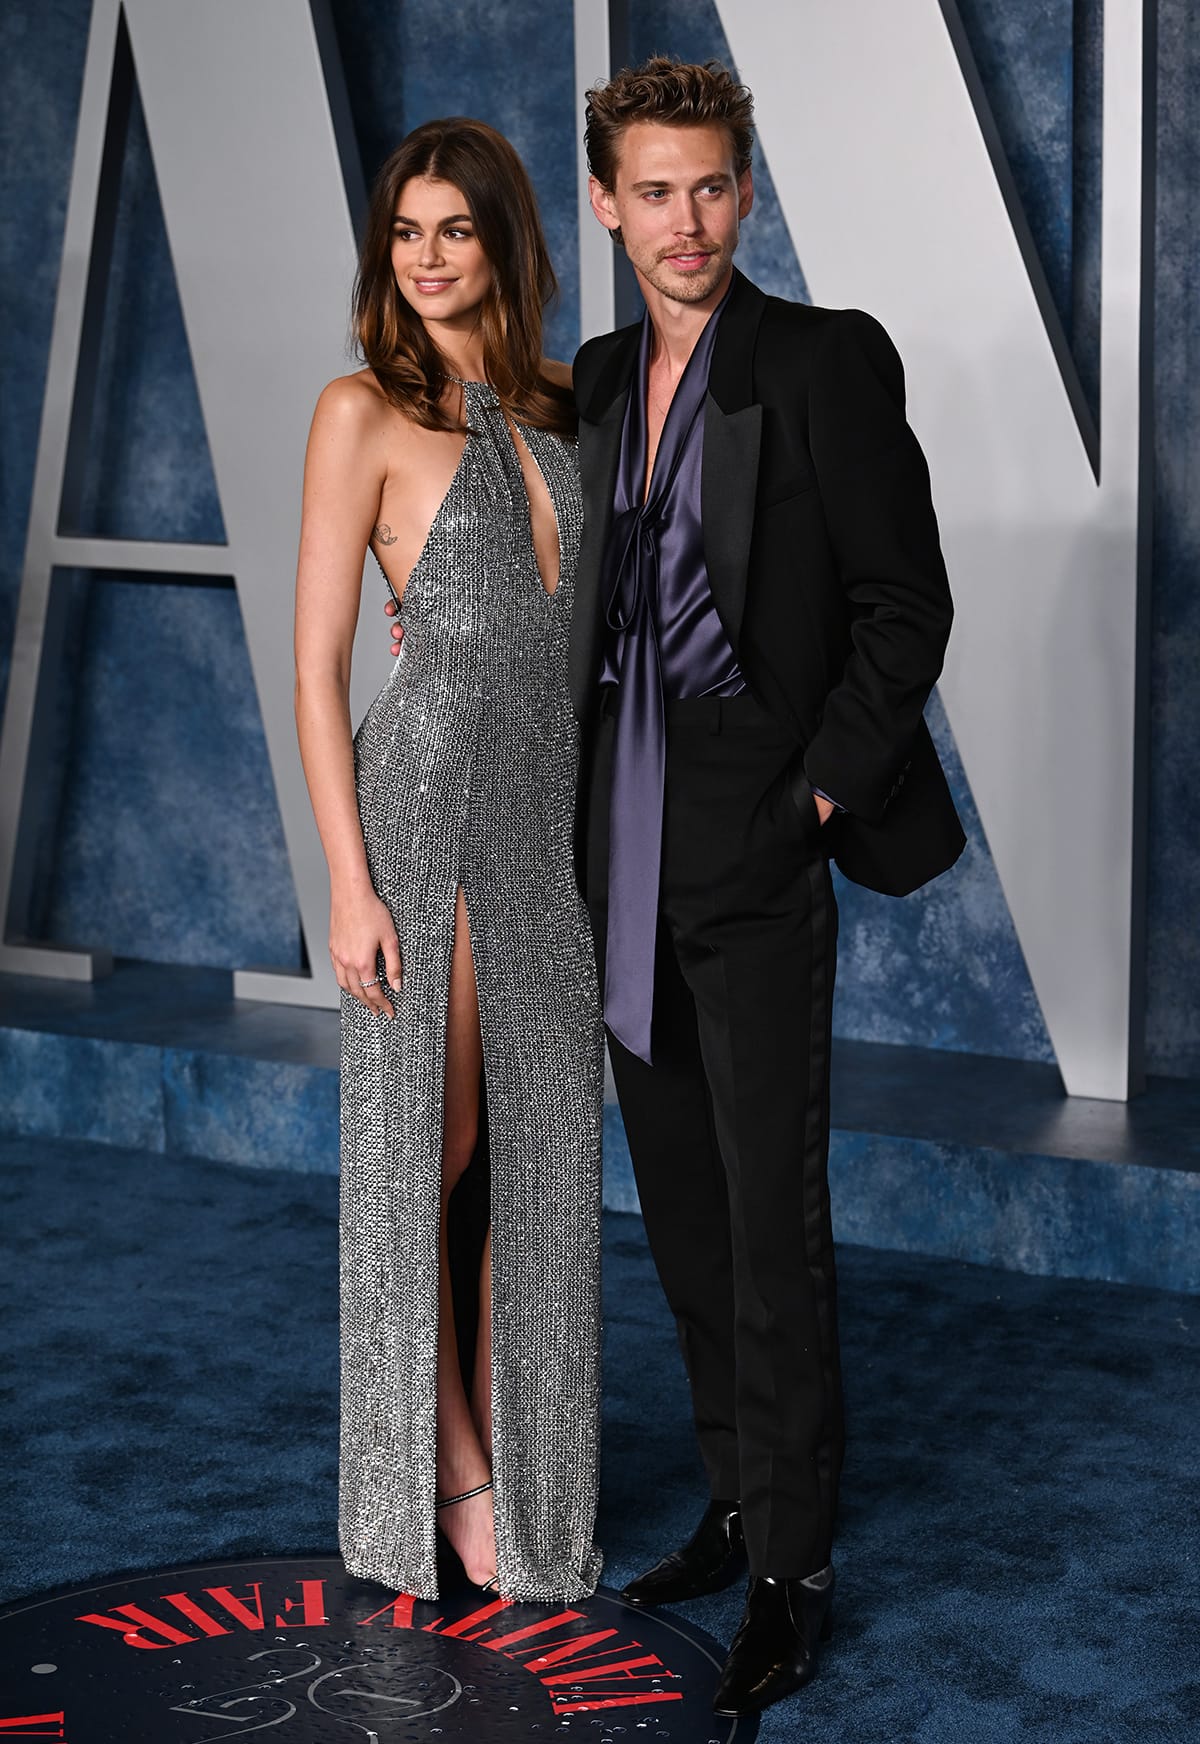 Kaia Gerber showcases her model figure in a slinky crystal-embellished gown by Celine